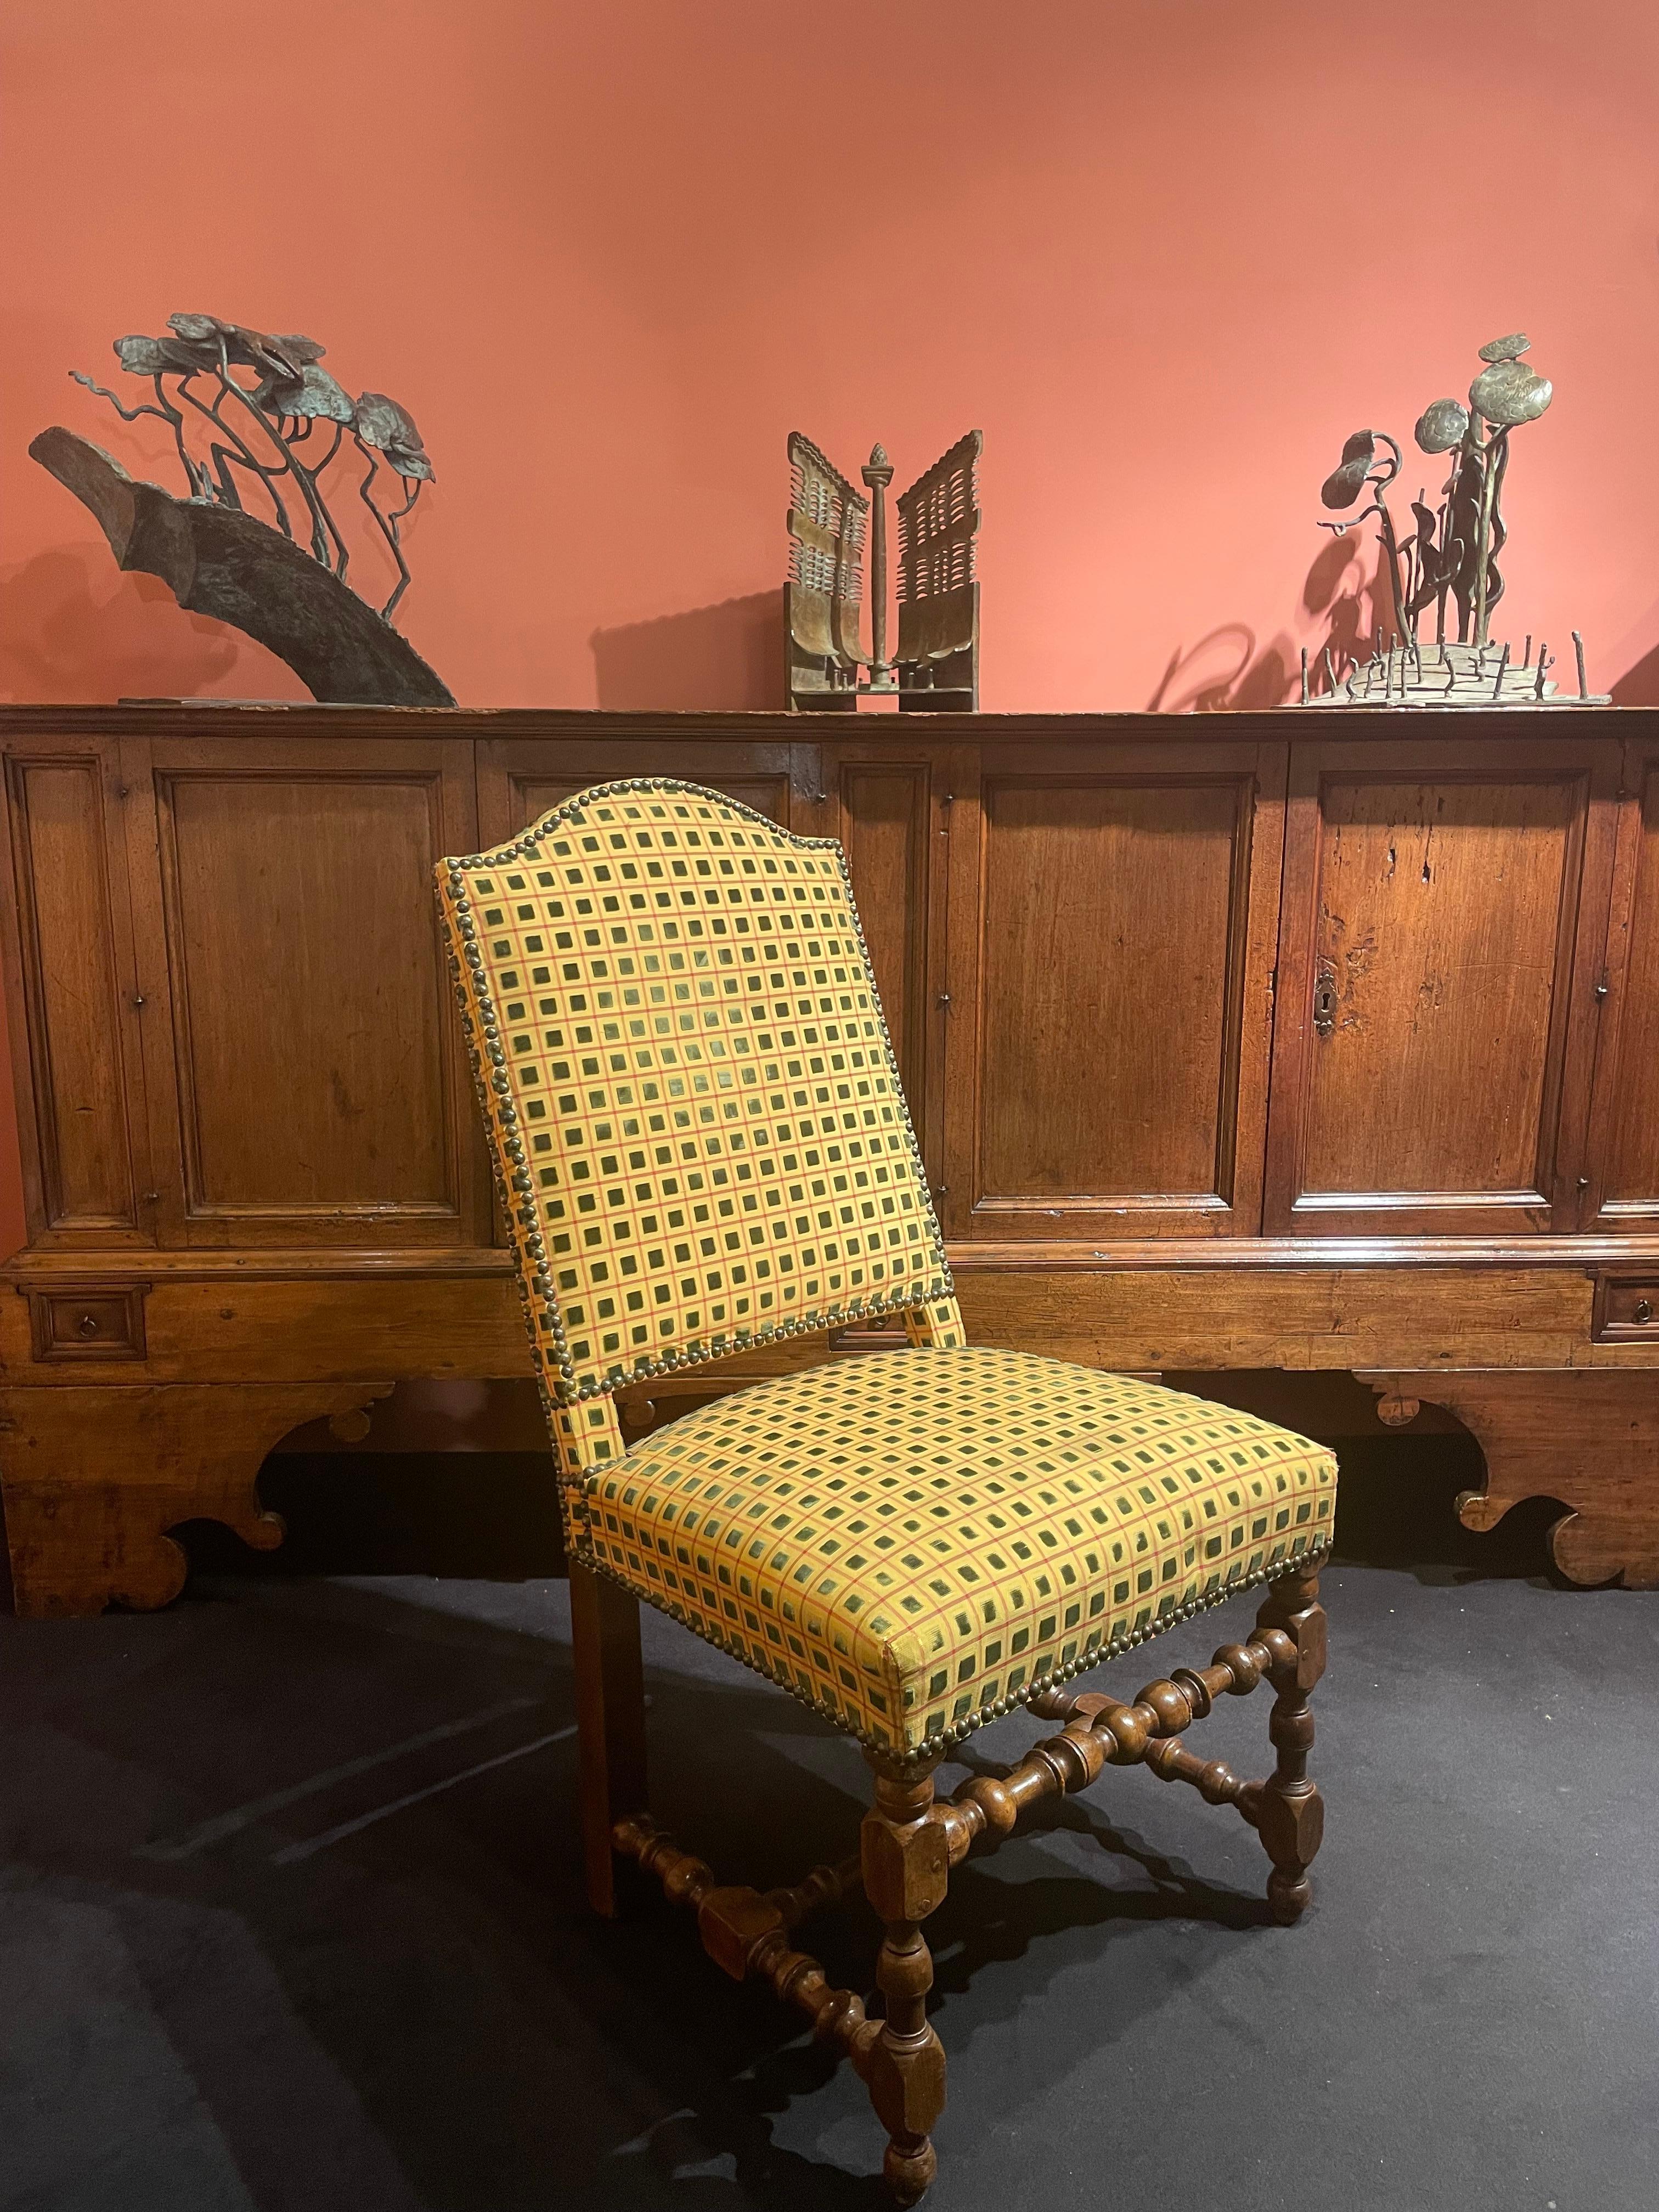 Set of four turned wooden chairs with a yellow velvet upholstery

Origin: France
Period: Early 17th century, Louis XIII Period

Measures: Height: 99 cm seat height: 45 cm
Width: 45 cm
Depth: 45 cm

Blond Walnut wood

Arch square back and